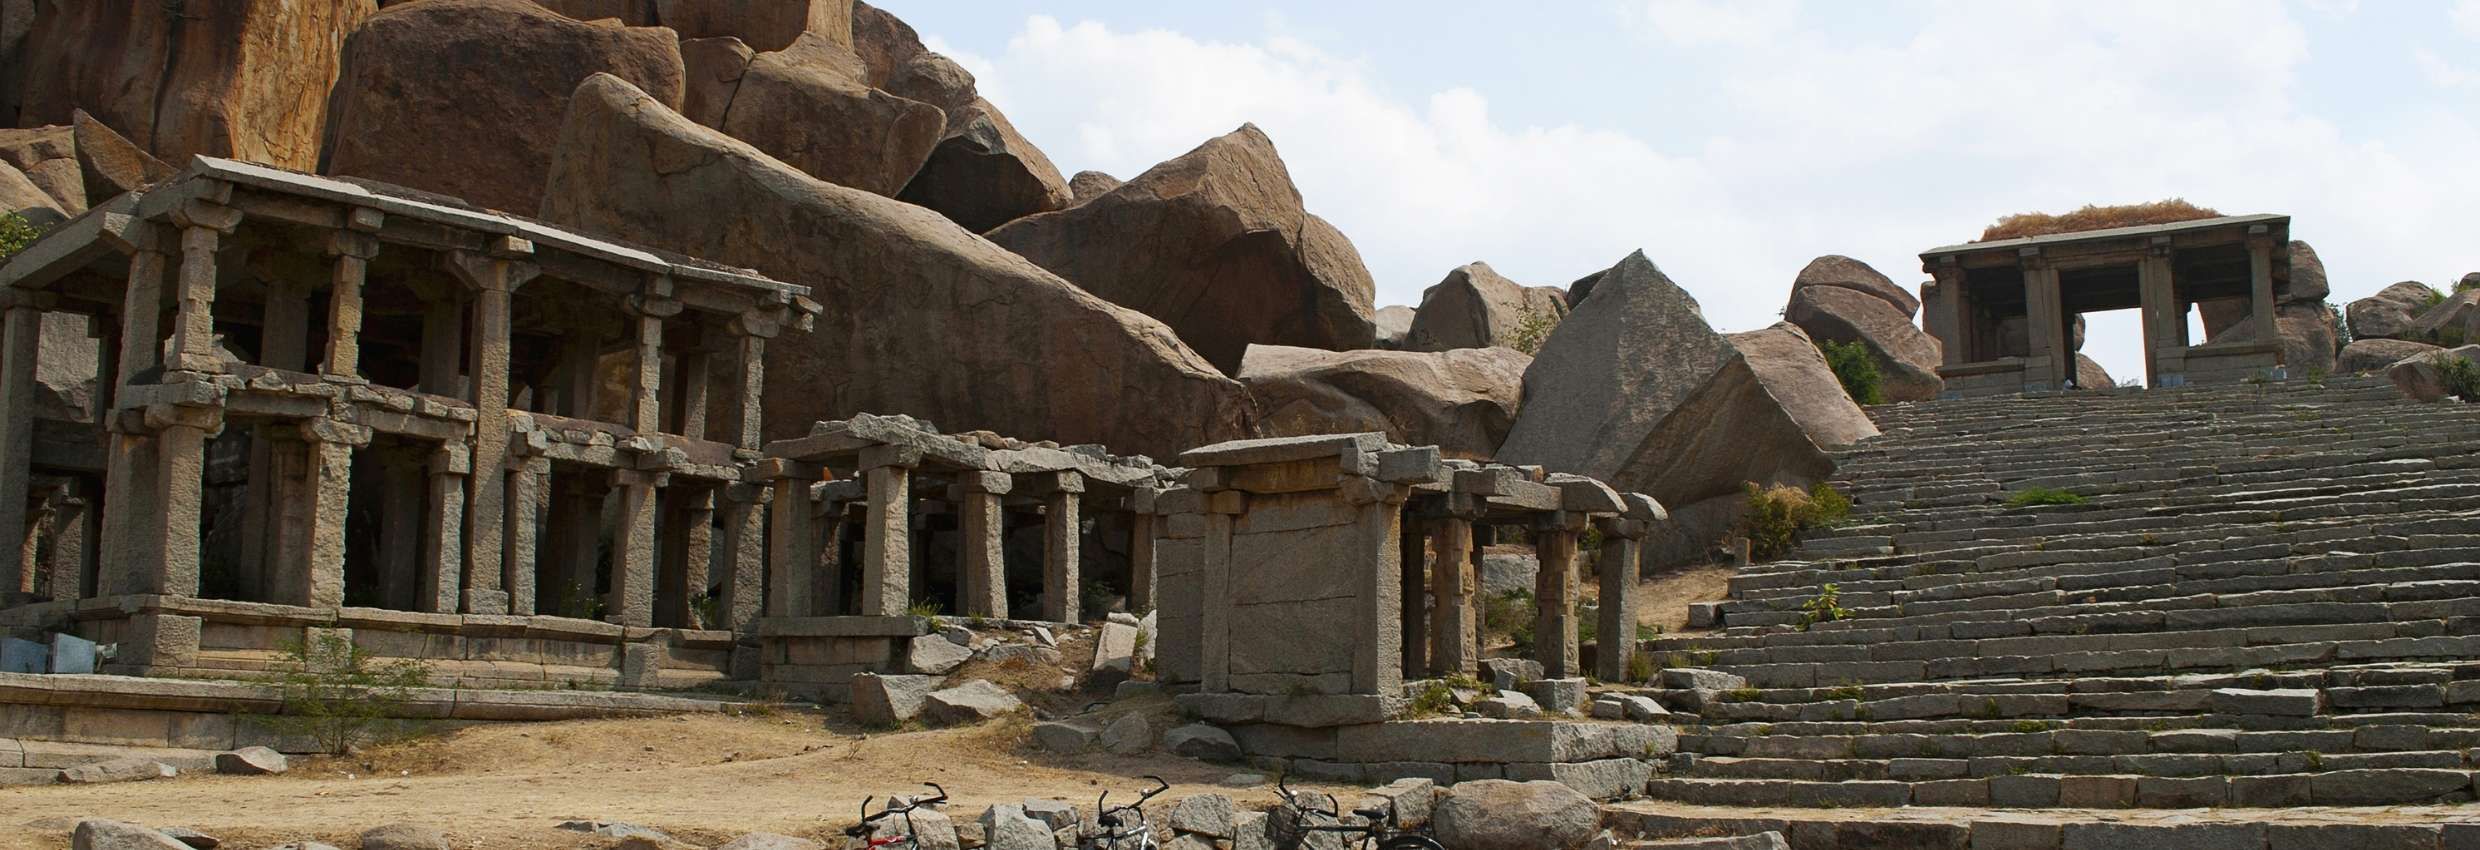 9. Ancient bazaars situated opposite the temples